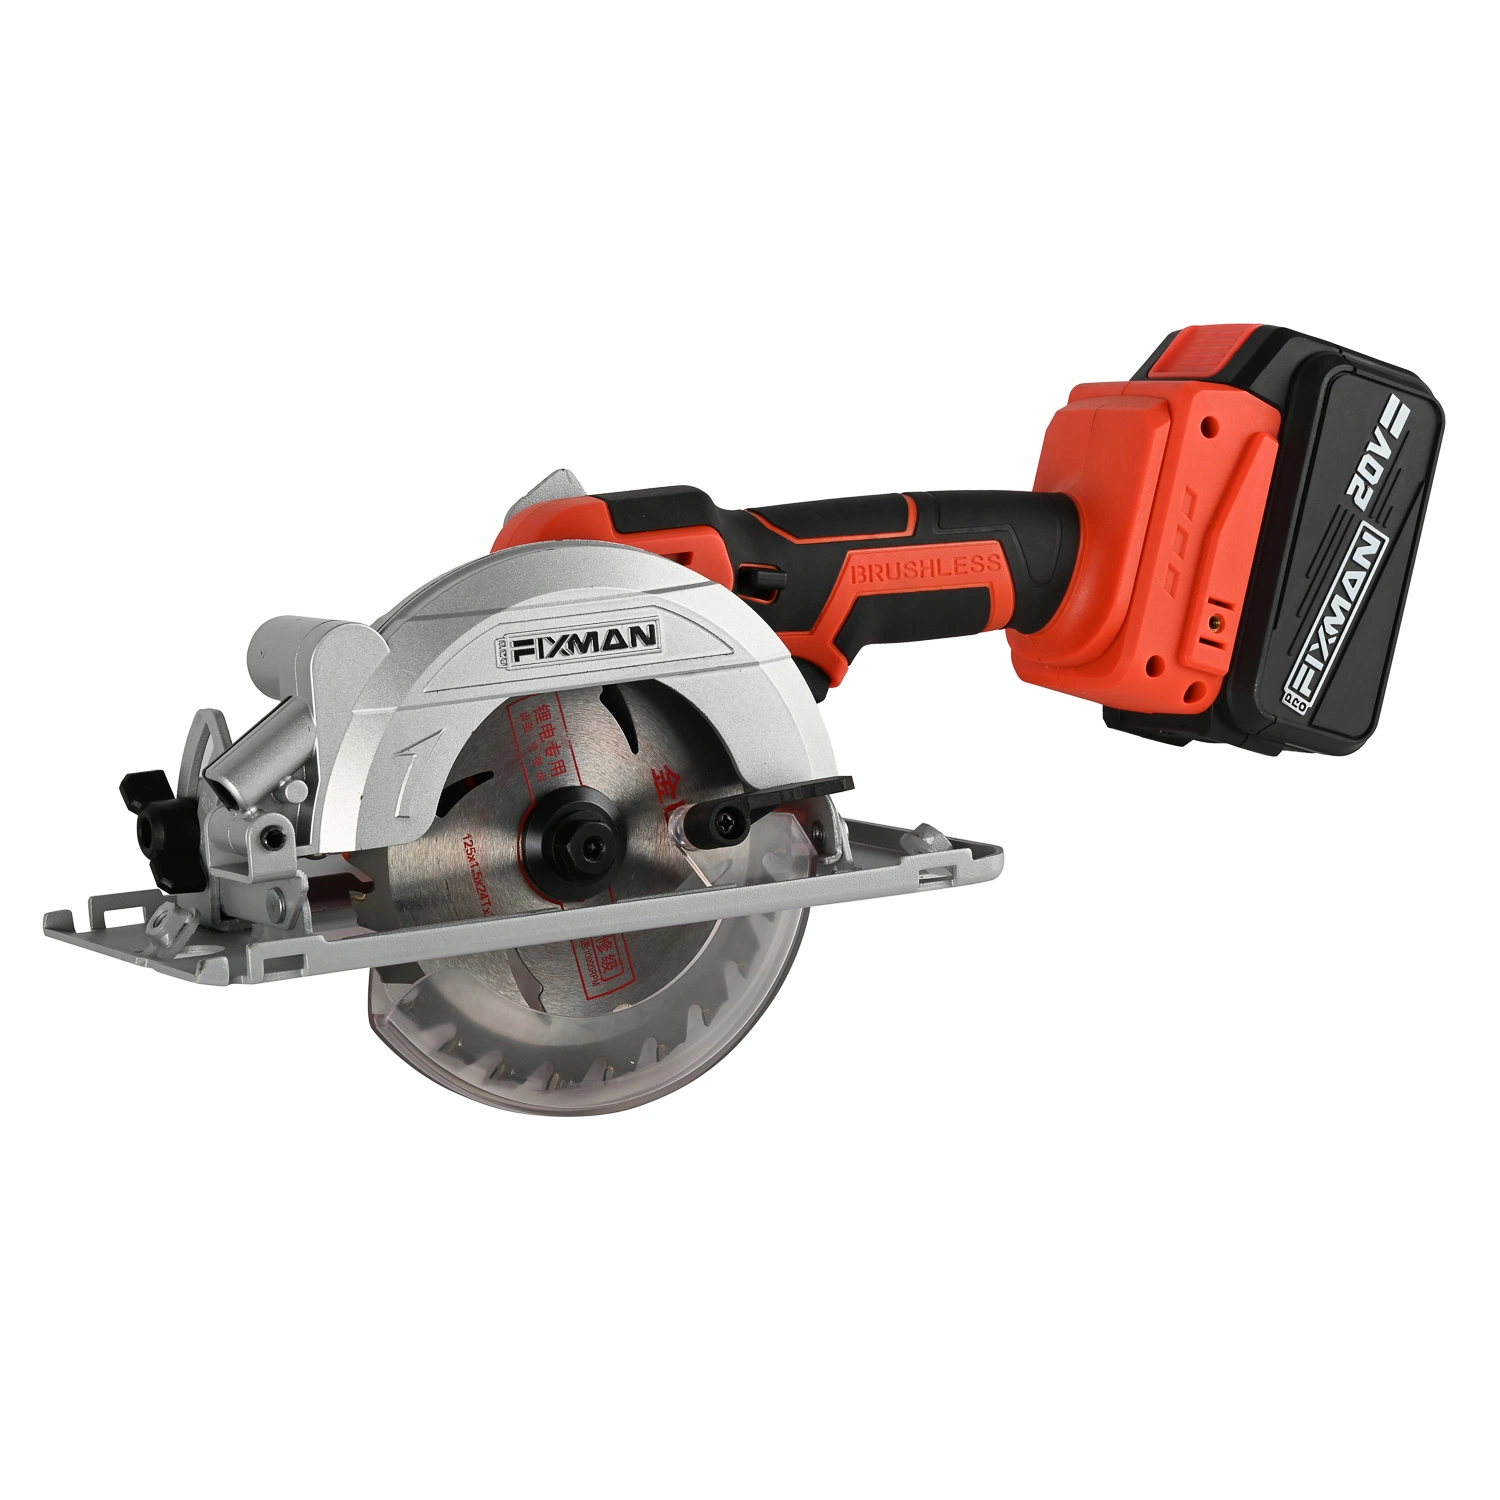 New Arrival 20V Cordless Circular Saw Power Tools with Laser Pointing